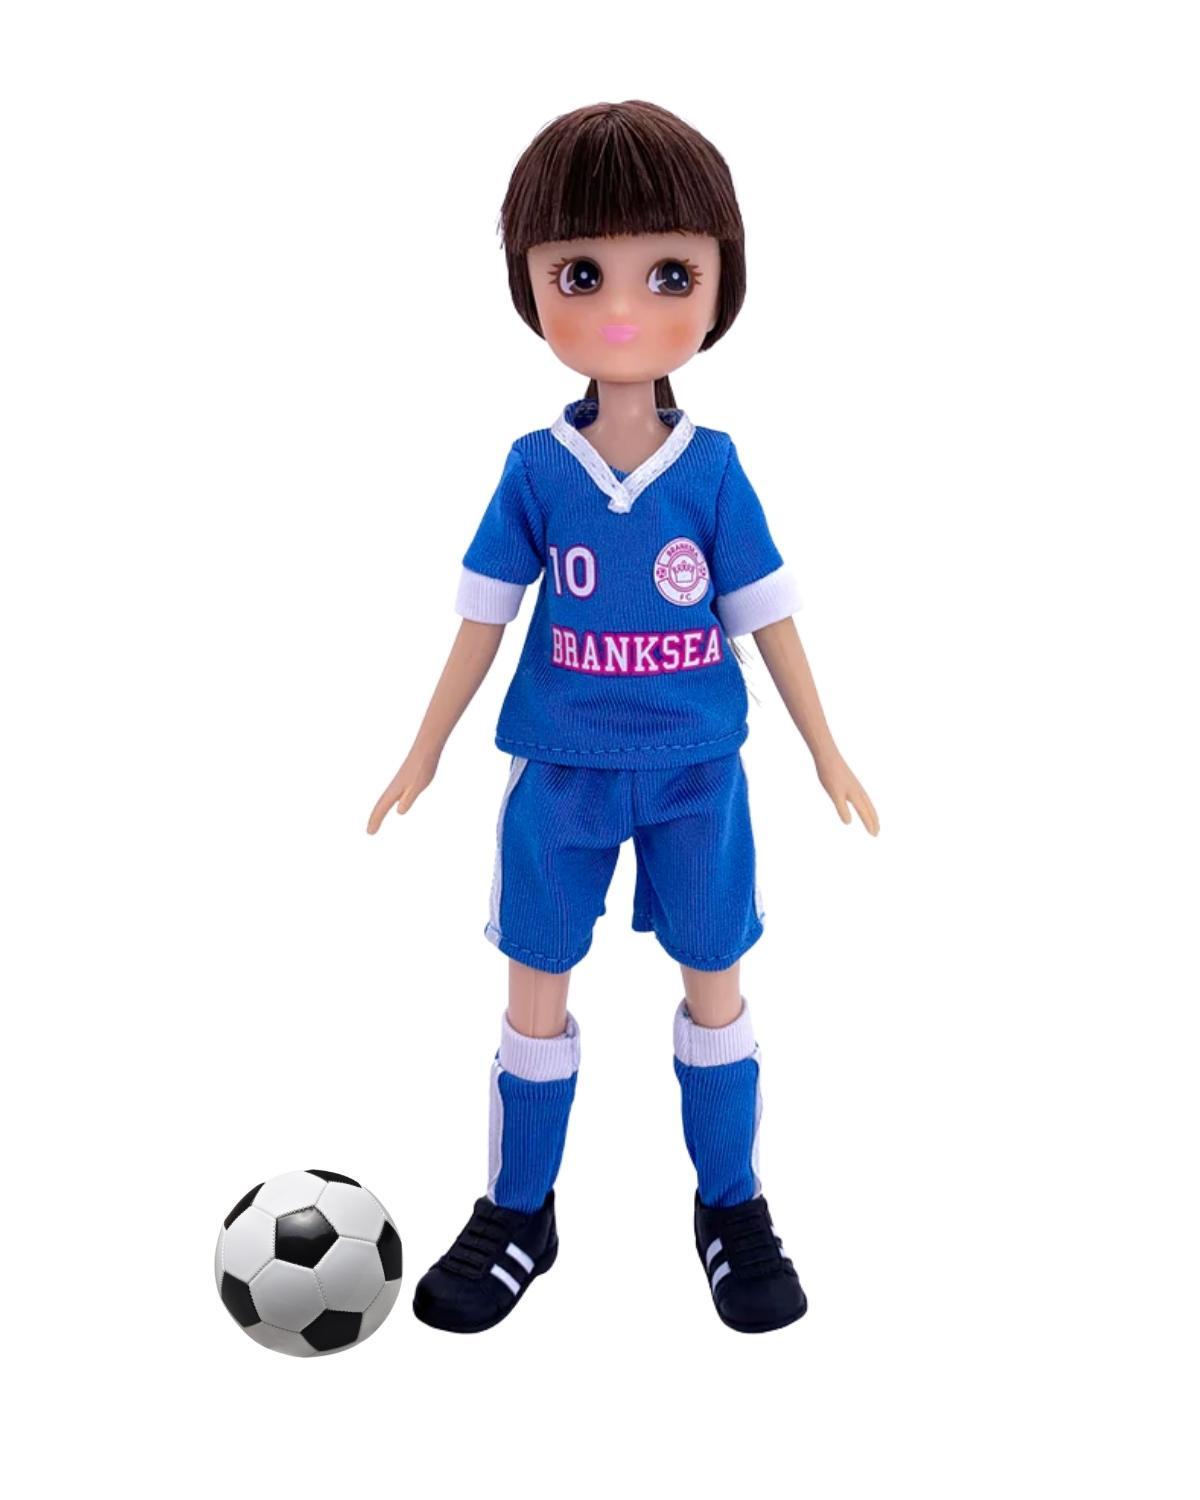 Lottie Doll wearing blue, red and white outfit.